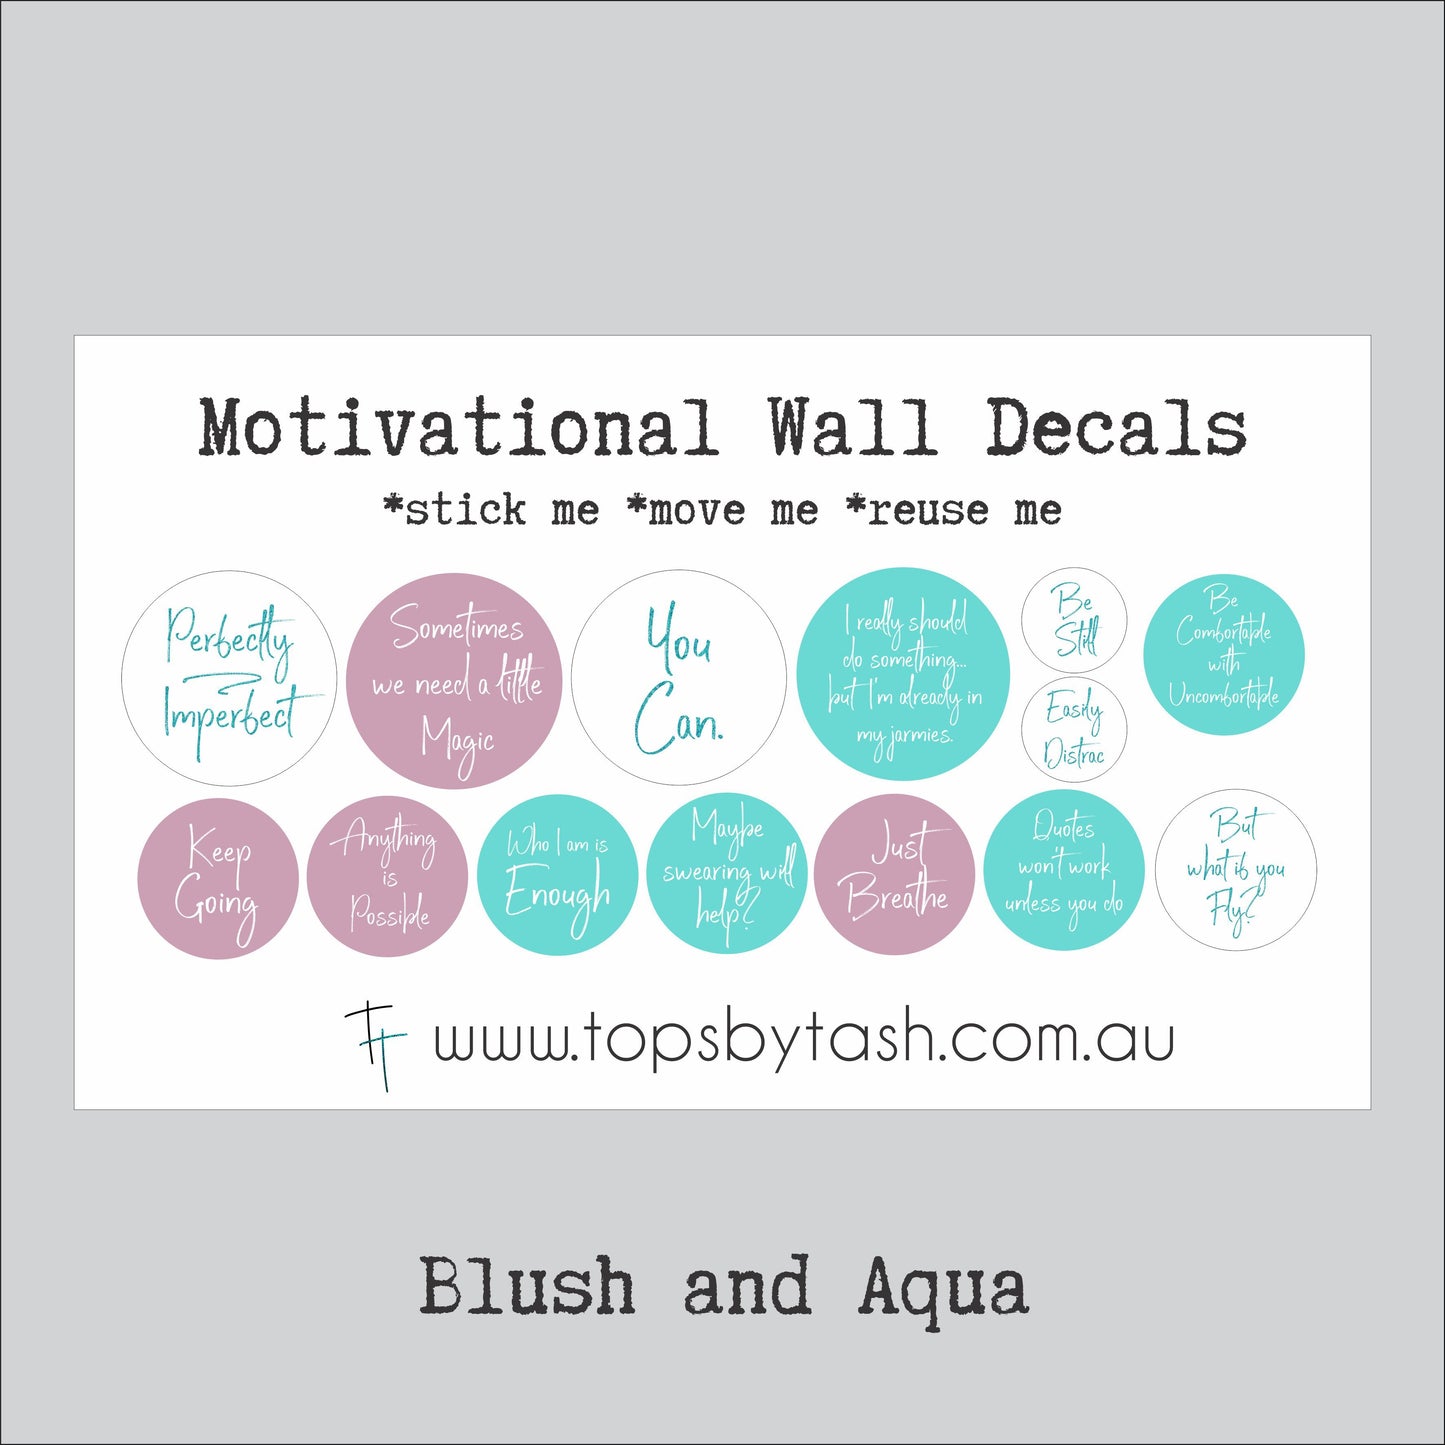 Motivational Wall Decals - Perfectly Imperfect